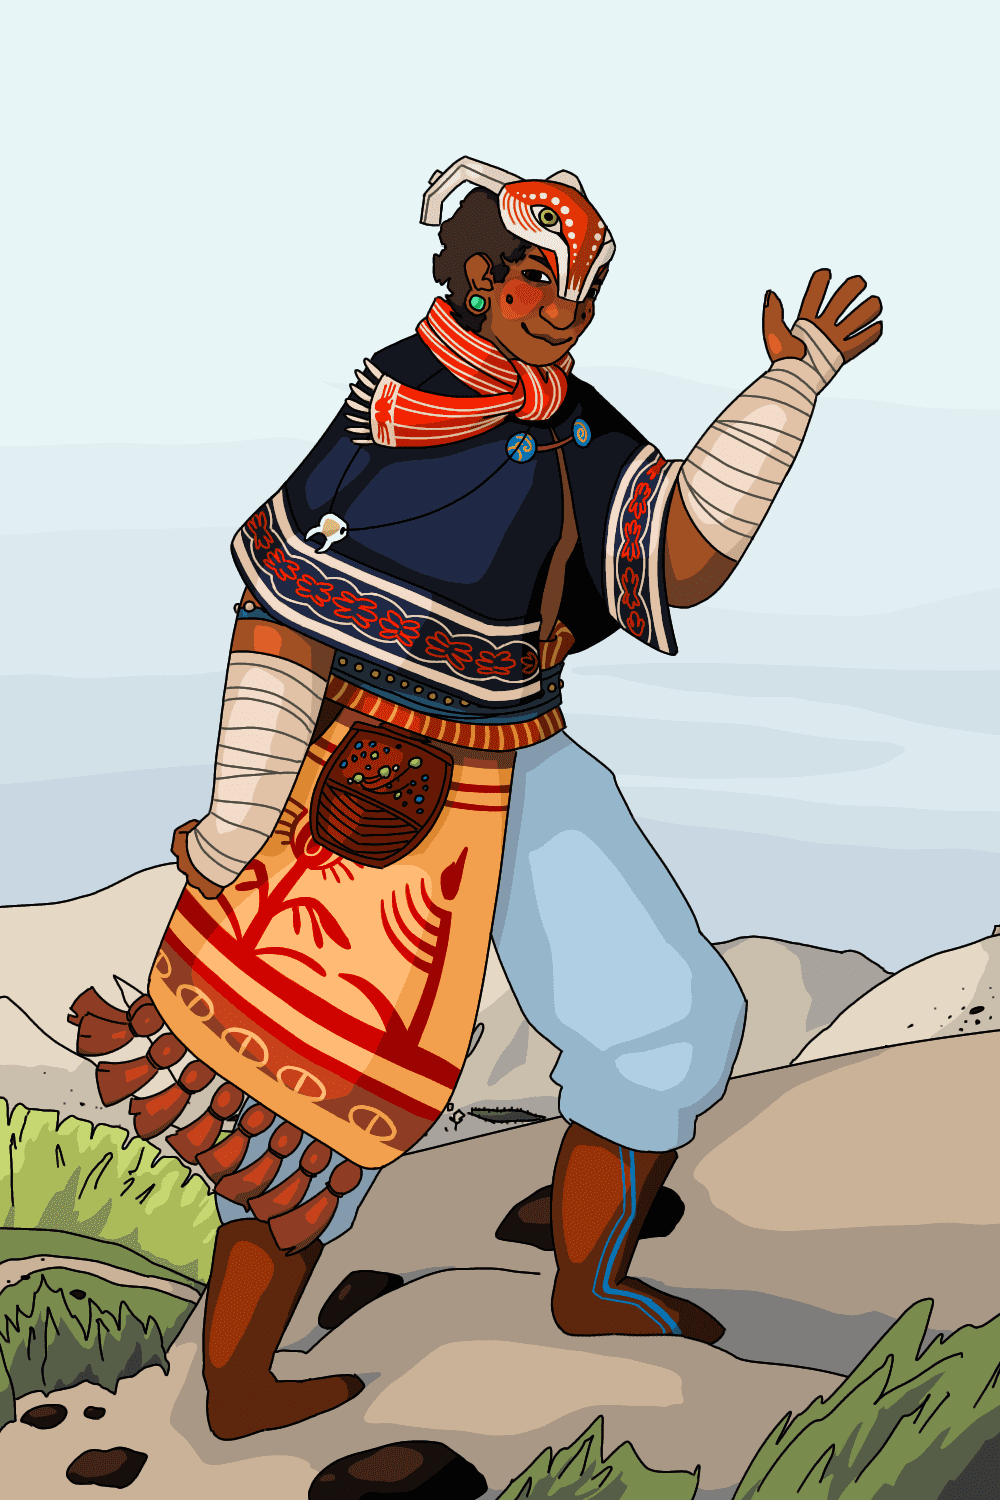 A digital picture of Nak-ouan. They are a round-faced brown person with several moles and curly hair cut very short. They wear an orange patterned scarf and a navy blue embroidered shawl; they have several multicolor sashes wrapped around their waist and from the belt is a small wood board studded with beads, a sword scabbard, and a suspender. Covering their legs are skirts of light blue and tan, the tan one being embroidered with lines and floral designs. Covering the top half of their face is a painted wood mask of a horned deer-like creature. They look at the viewer and smile, waving with one hand, as they step forward up a desert hill.